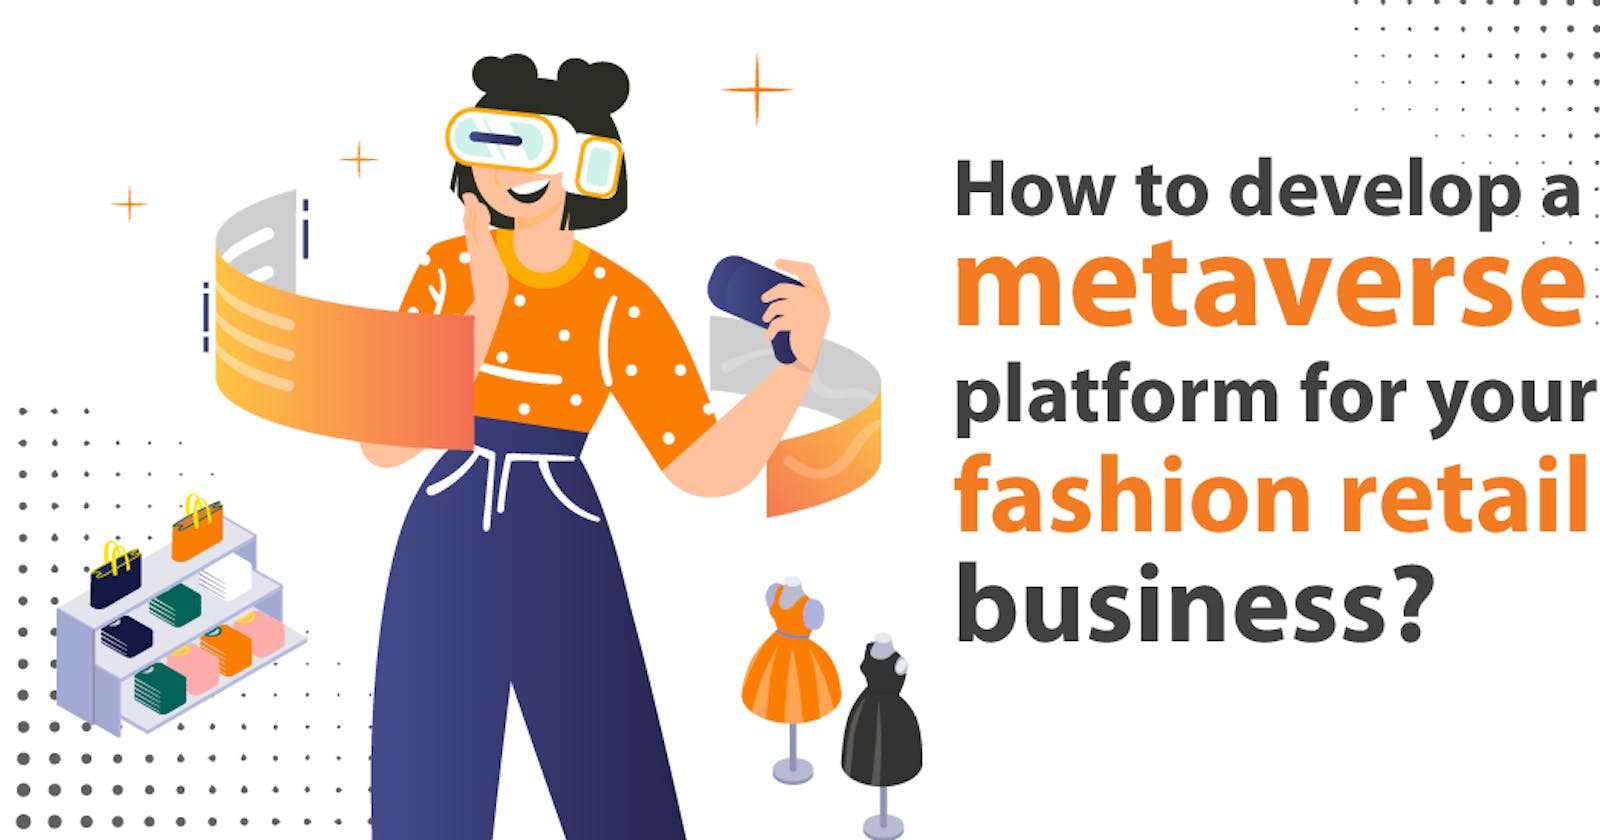 How to develop a metaverse platform for your fashion retail business?